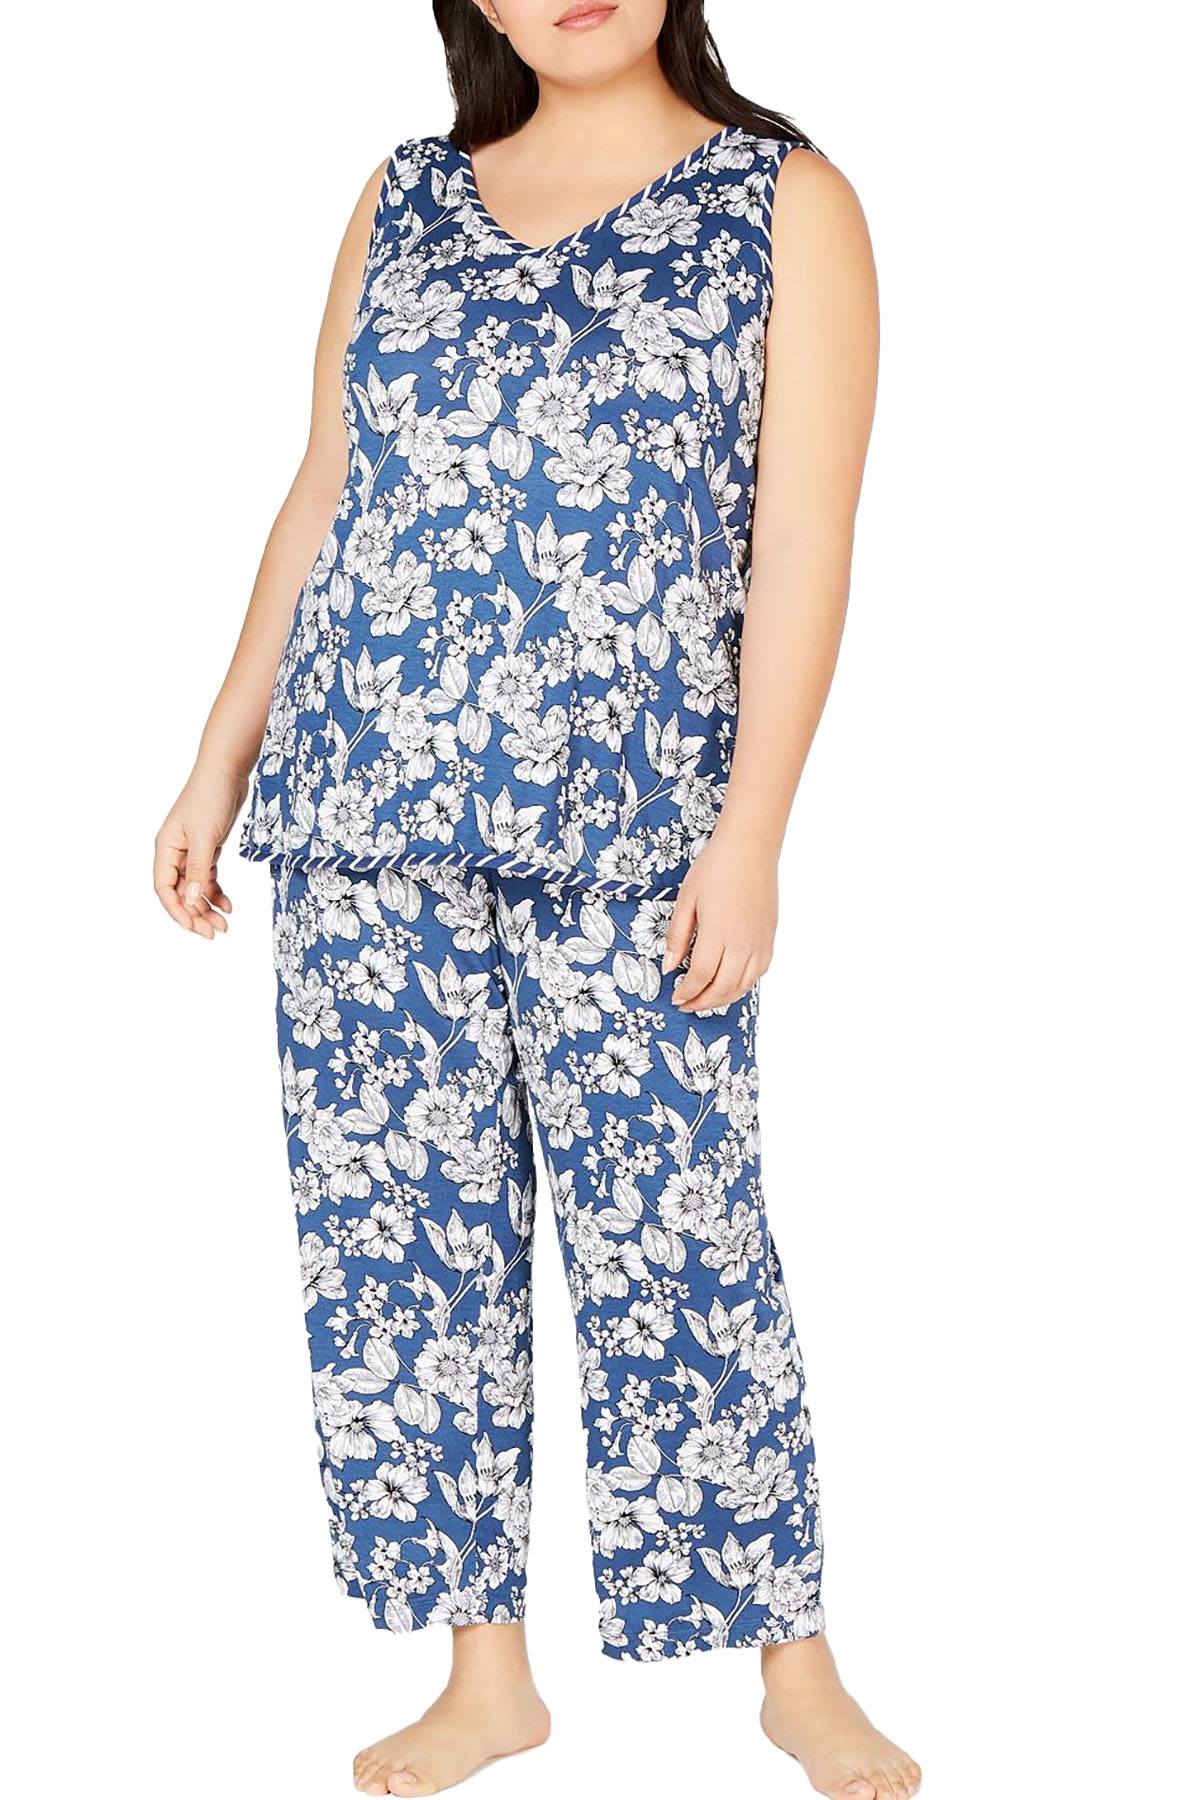 Charter Club PLUS Tank And Cropped Pant Pajama Set in Sunny Floral Blue